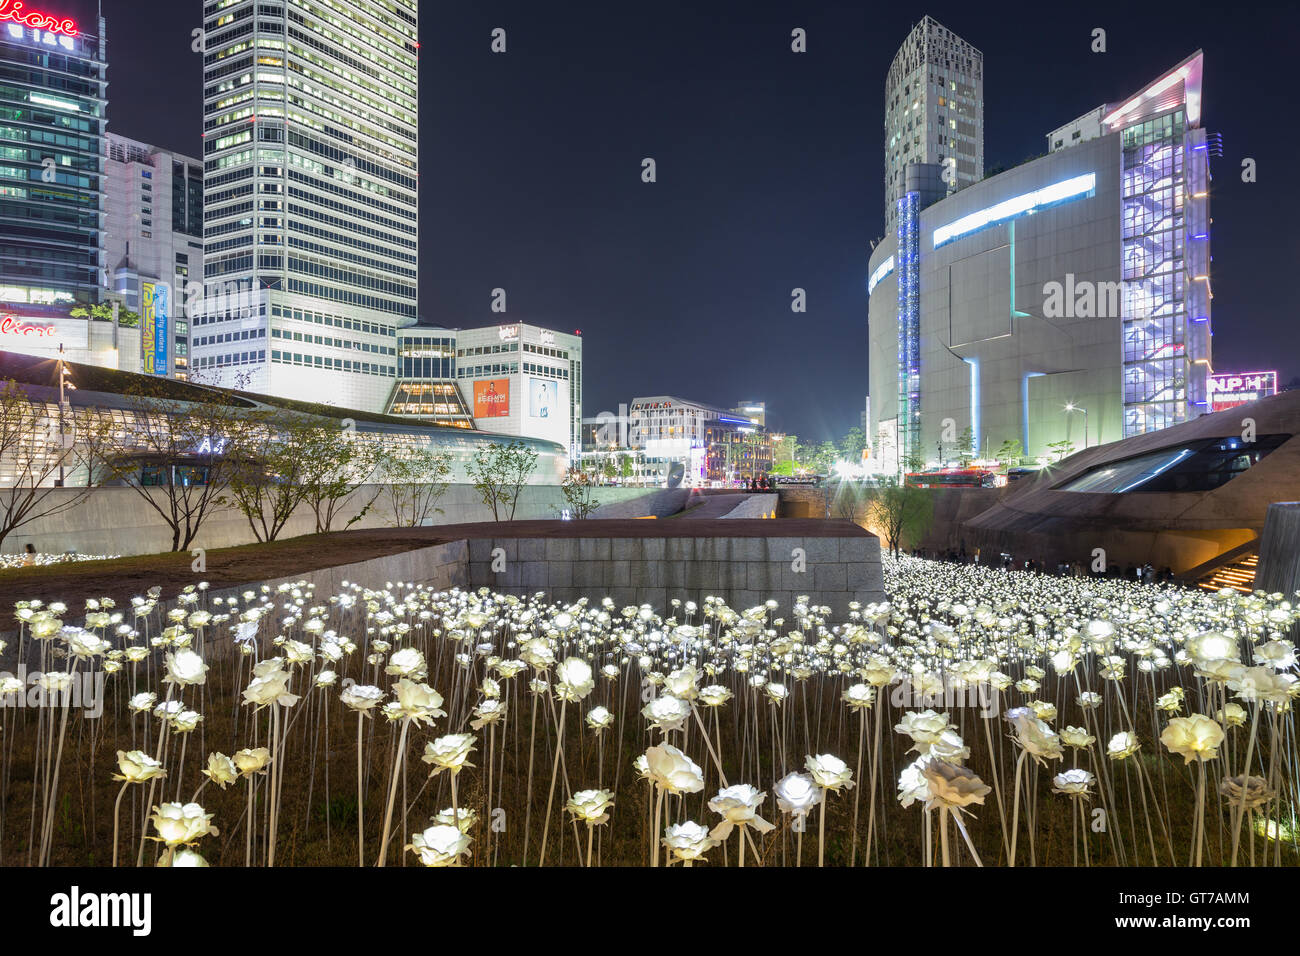 Lit LED Rose Garden at the Dongdaemun Design Plaza in Seoul, South Korea at night, viewed from the front. Stock Photo